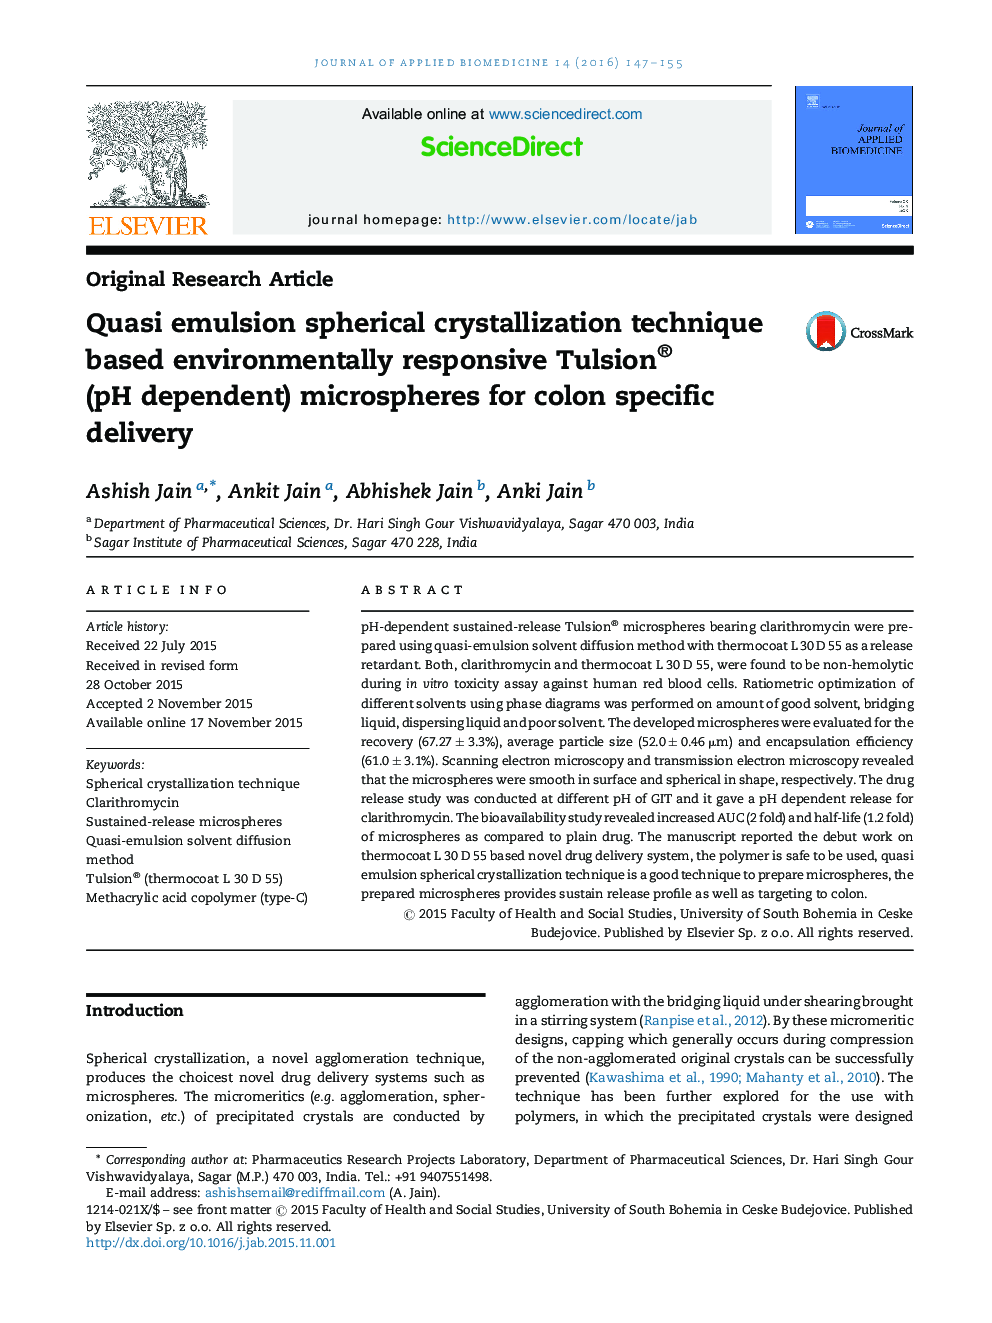 Quasi emulsion spherical crystallization technique based environmentally responsive Tulsion® (pH dependent) microspheres for colon specific delivery